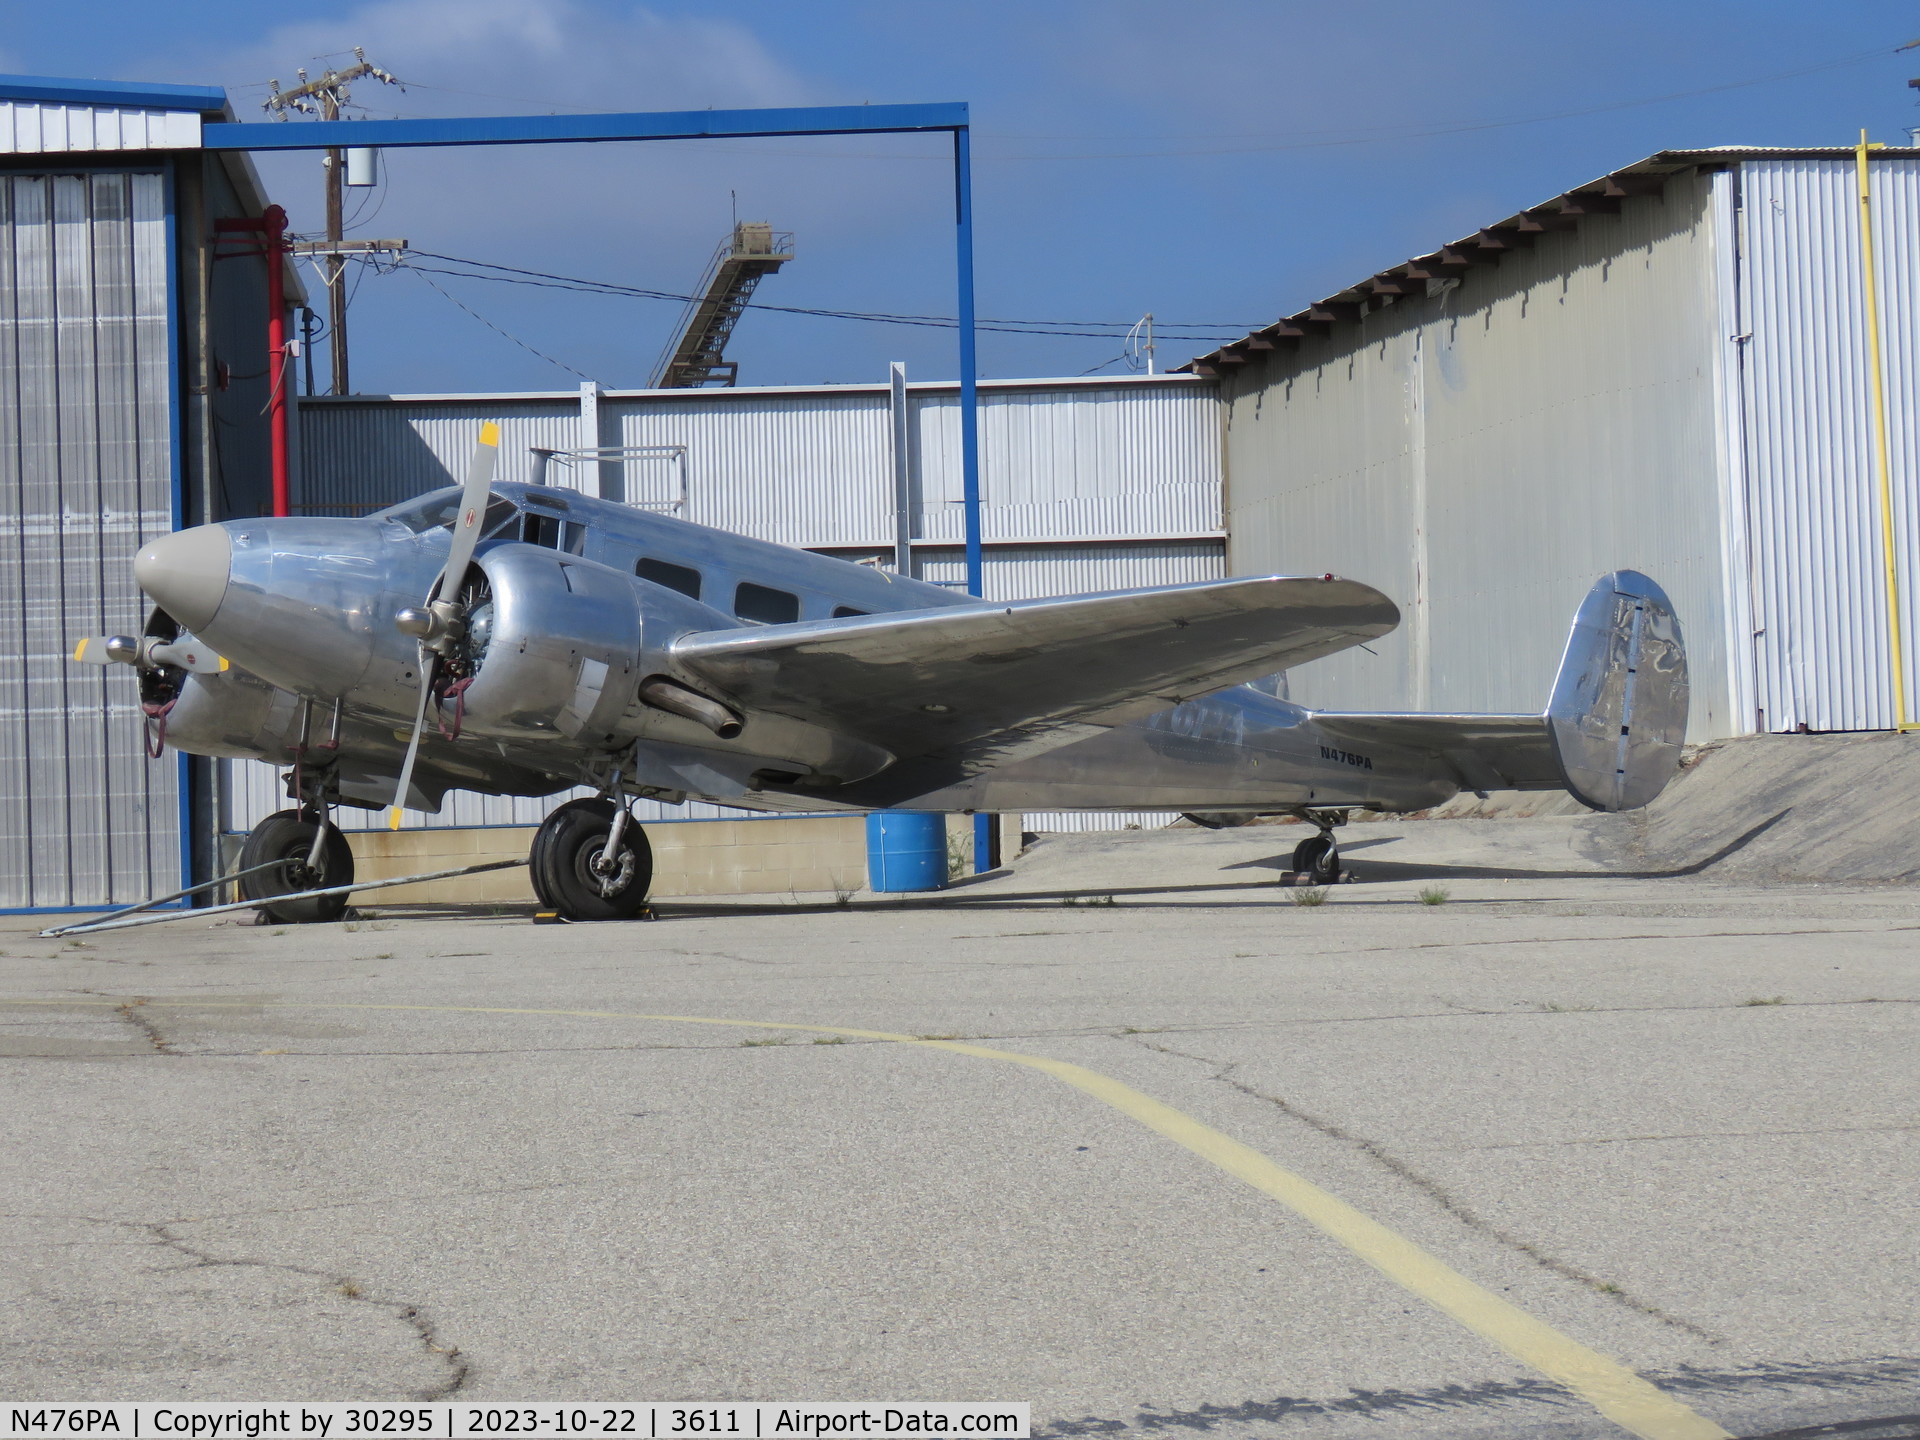 N476PA, 1952 Beech Expeditor 3NM (D18S) C/N CA-265, Parked